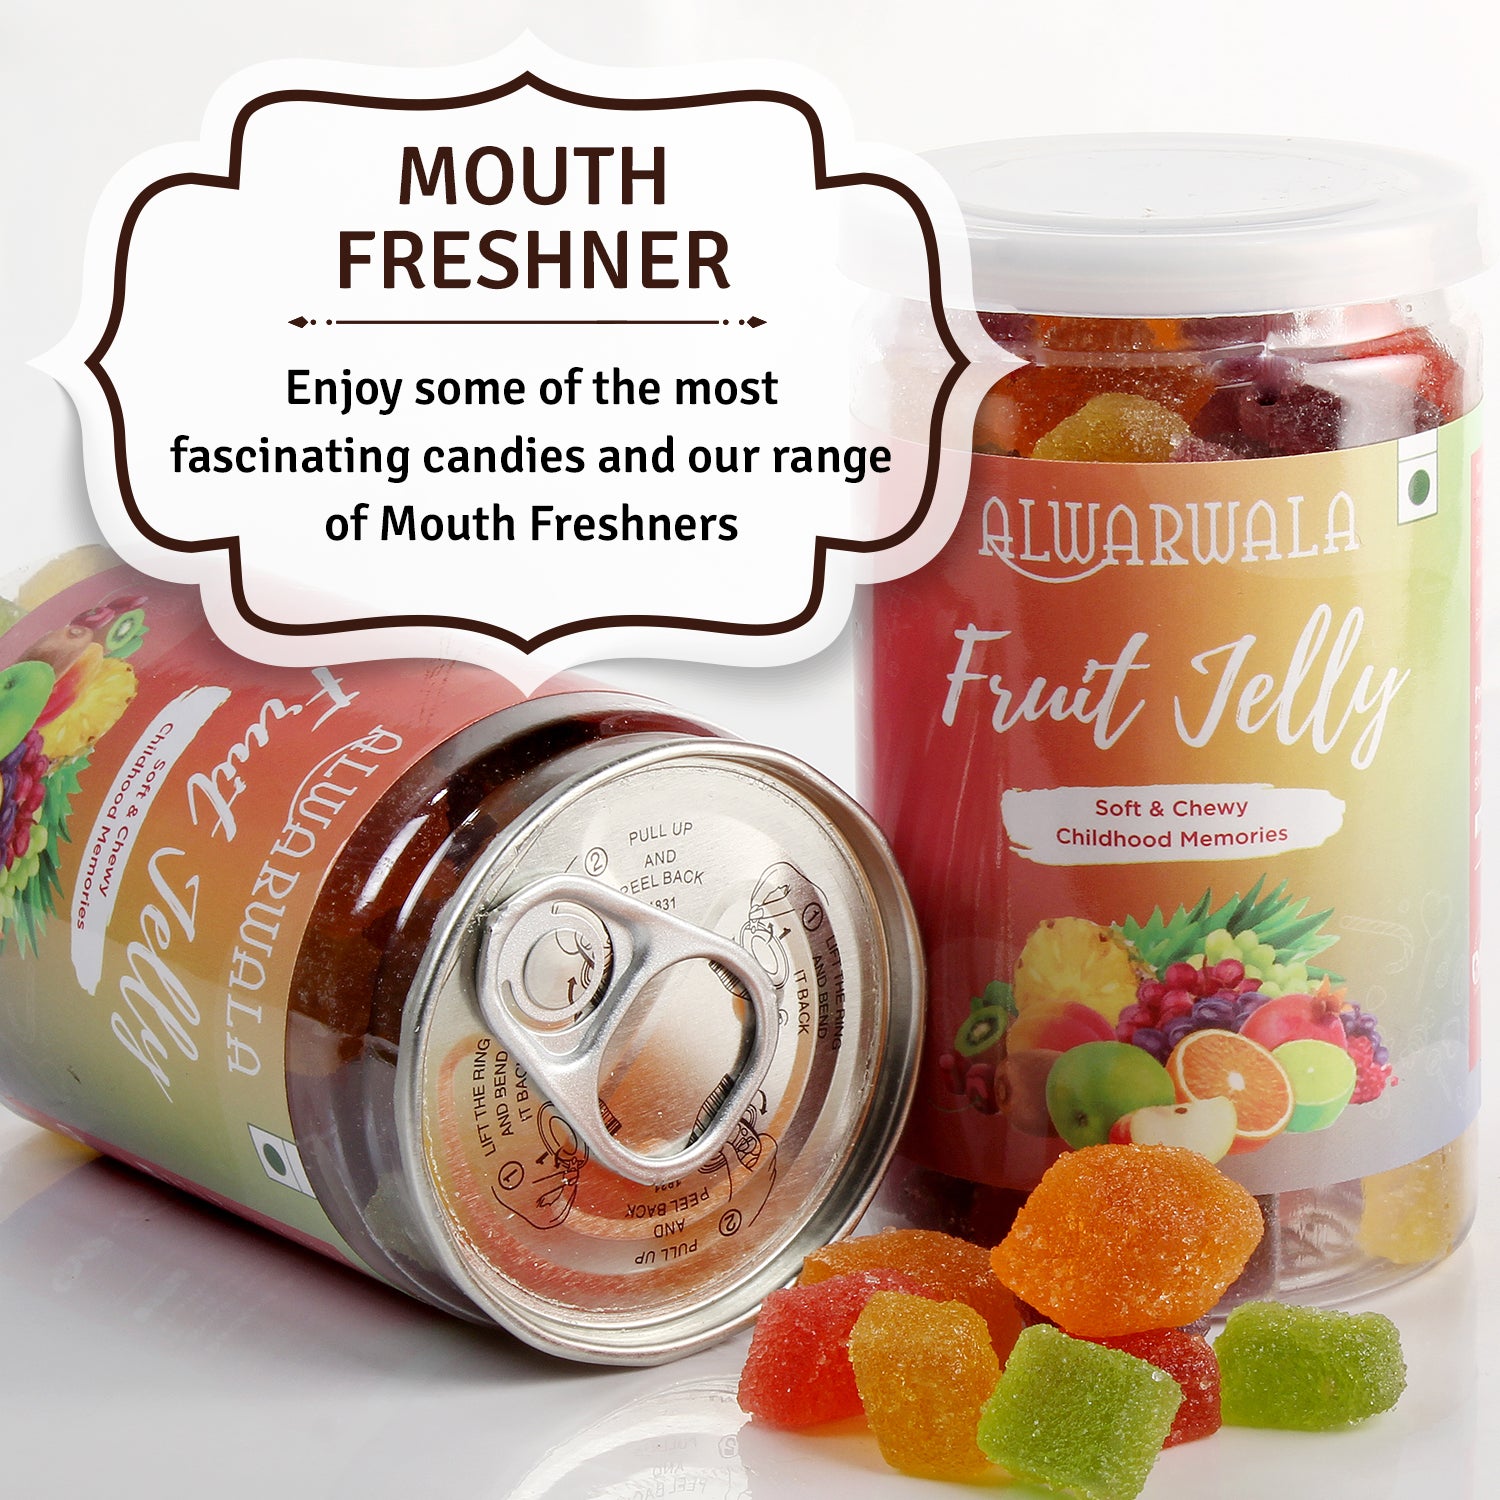 MOUTH FRESHNERS